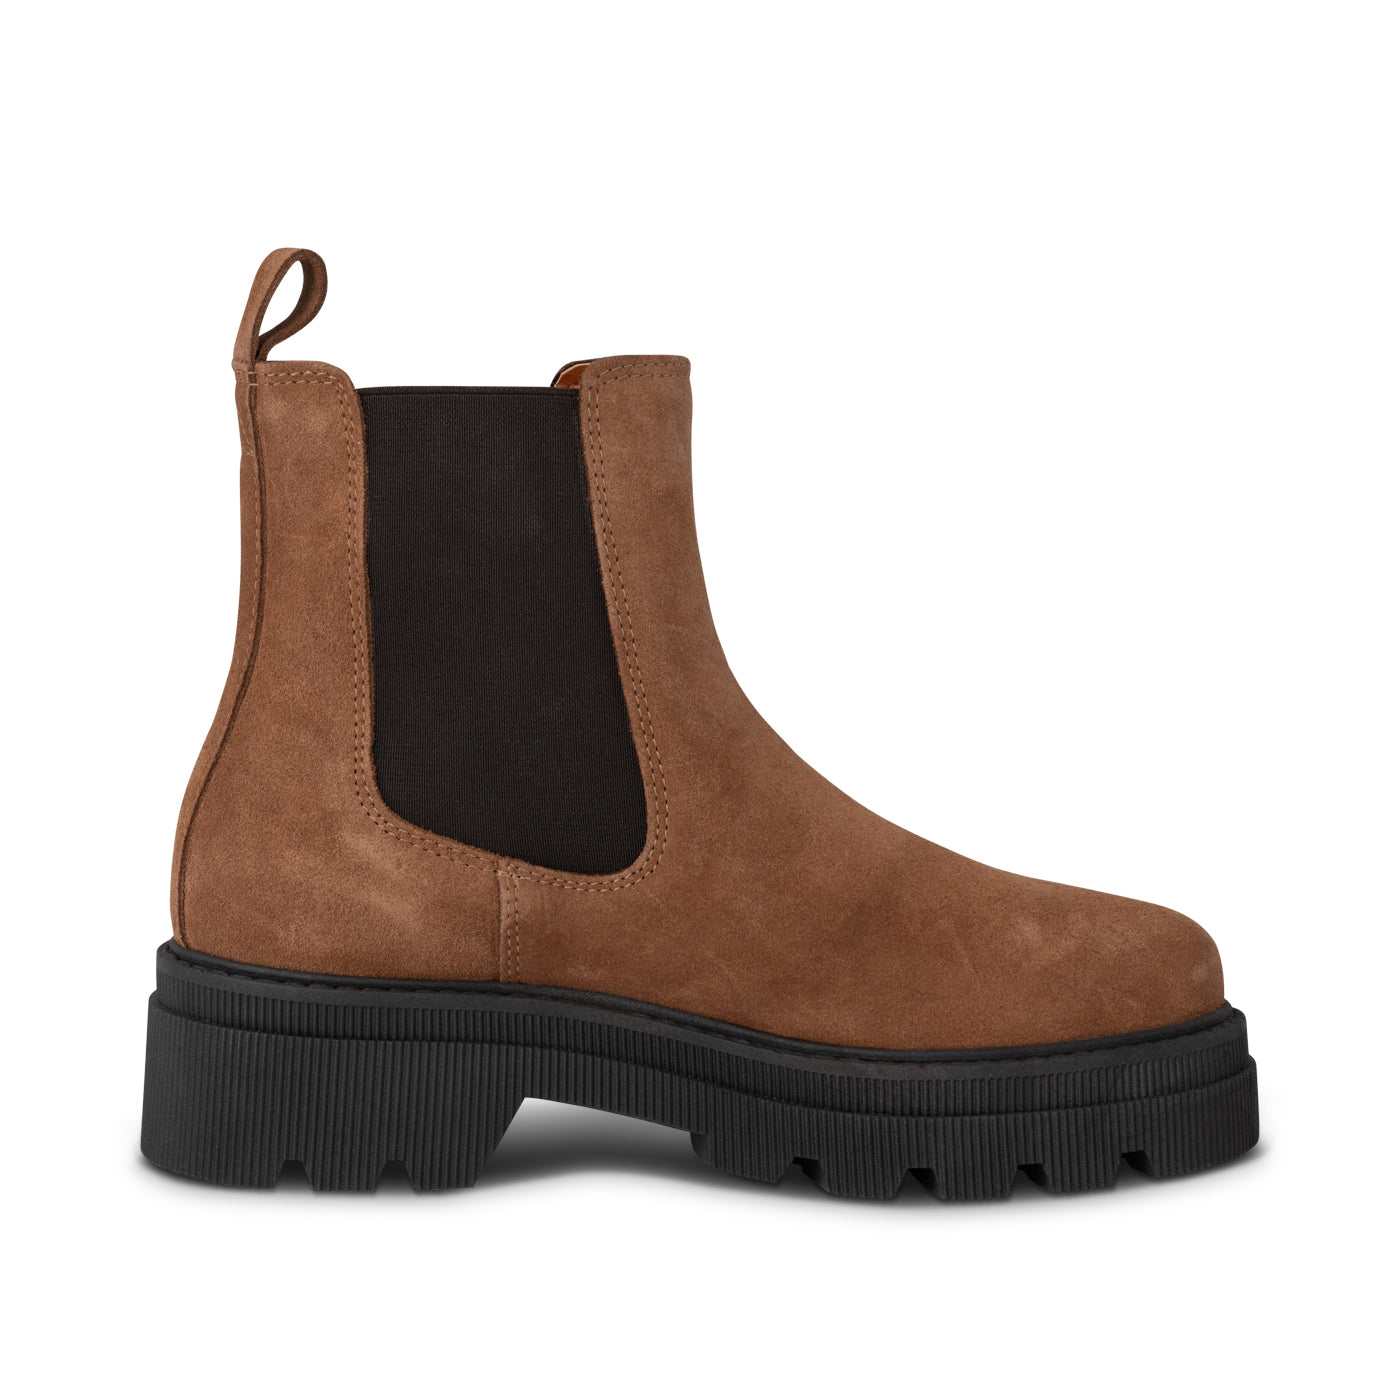 SHOE THE BEAR WOMENS STB-Sanna Chelsea S Chelsea Boots 067 Brown